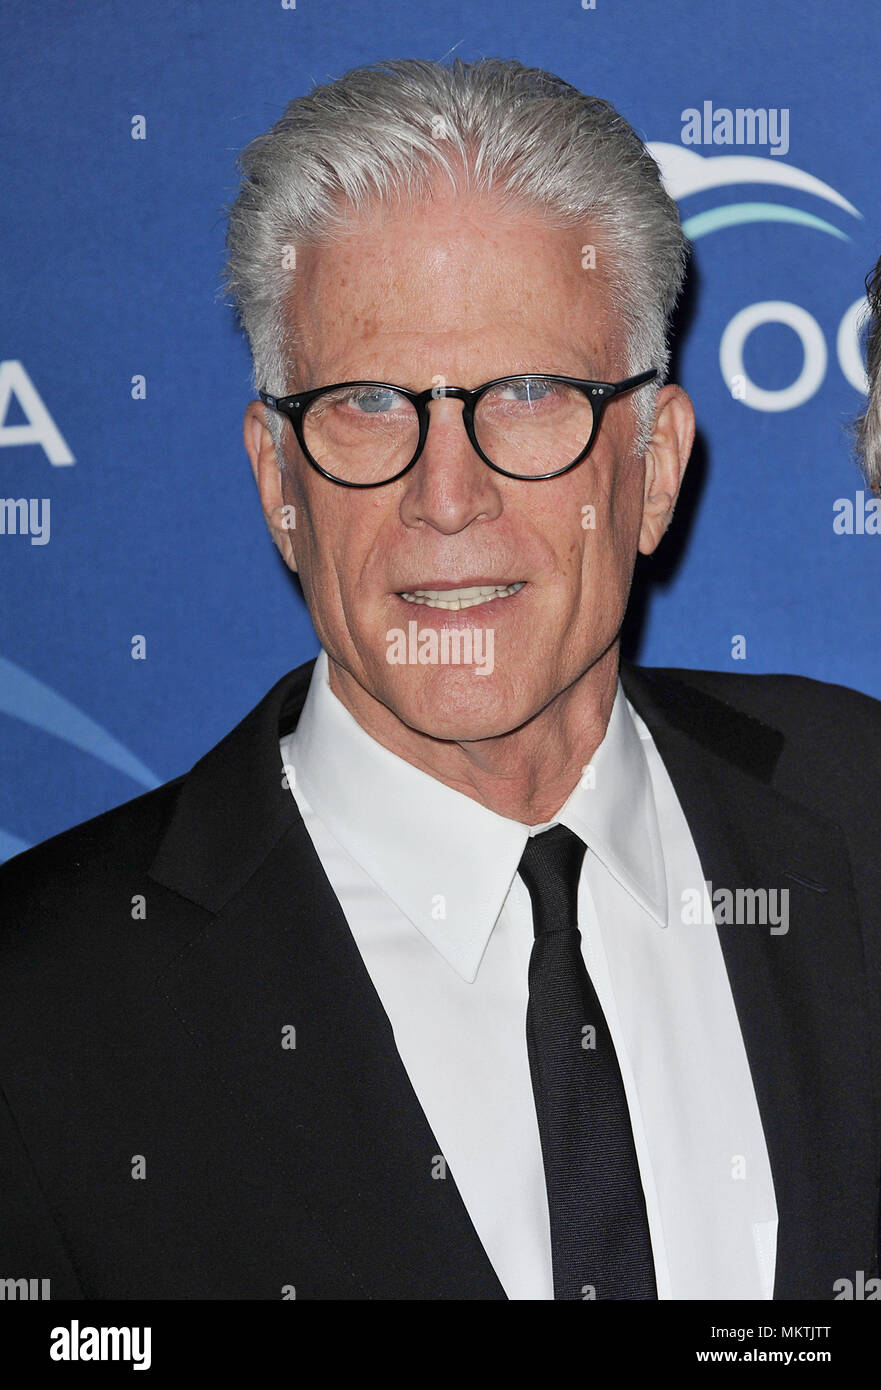 Ted Danson  arriving at the Oceana'S Partner Awards Gala 2013 at the Beverly Wishire Hotel In Los Angeles.Ted Danson 145 Red Carpet Event, Vertical, USA, Film Industry, Celebrities,  Photography, Bestof, Arts Culture and Entertainment, Topix Celebrities fashion /  Vertical, Best of, Event in Hollywood Life - California,  Red Carpet and backstage, USA, Film Industry, Celebrities,  movie celebrities, TV celebrities, Music celebrities, Photography, Bestof, Arts Culture and Entertainment,  Topix, headshot, vertical, one person,, from the year , 2013, inquiry tsuni@Gamma-USA.com Stock Photo